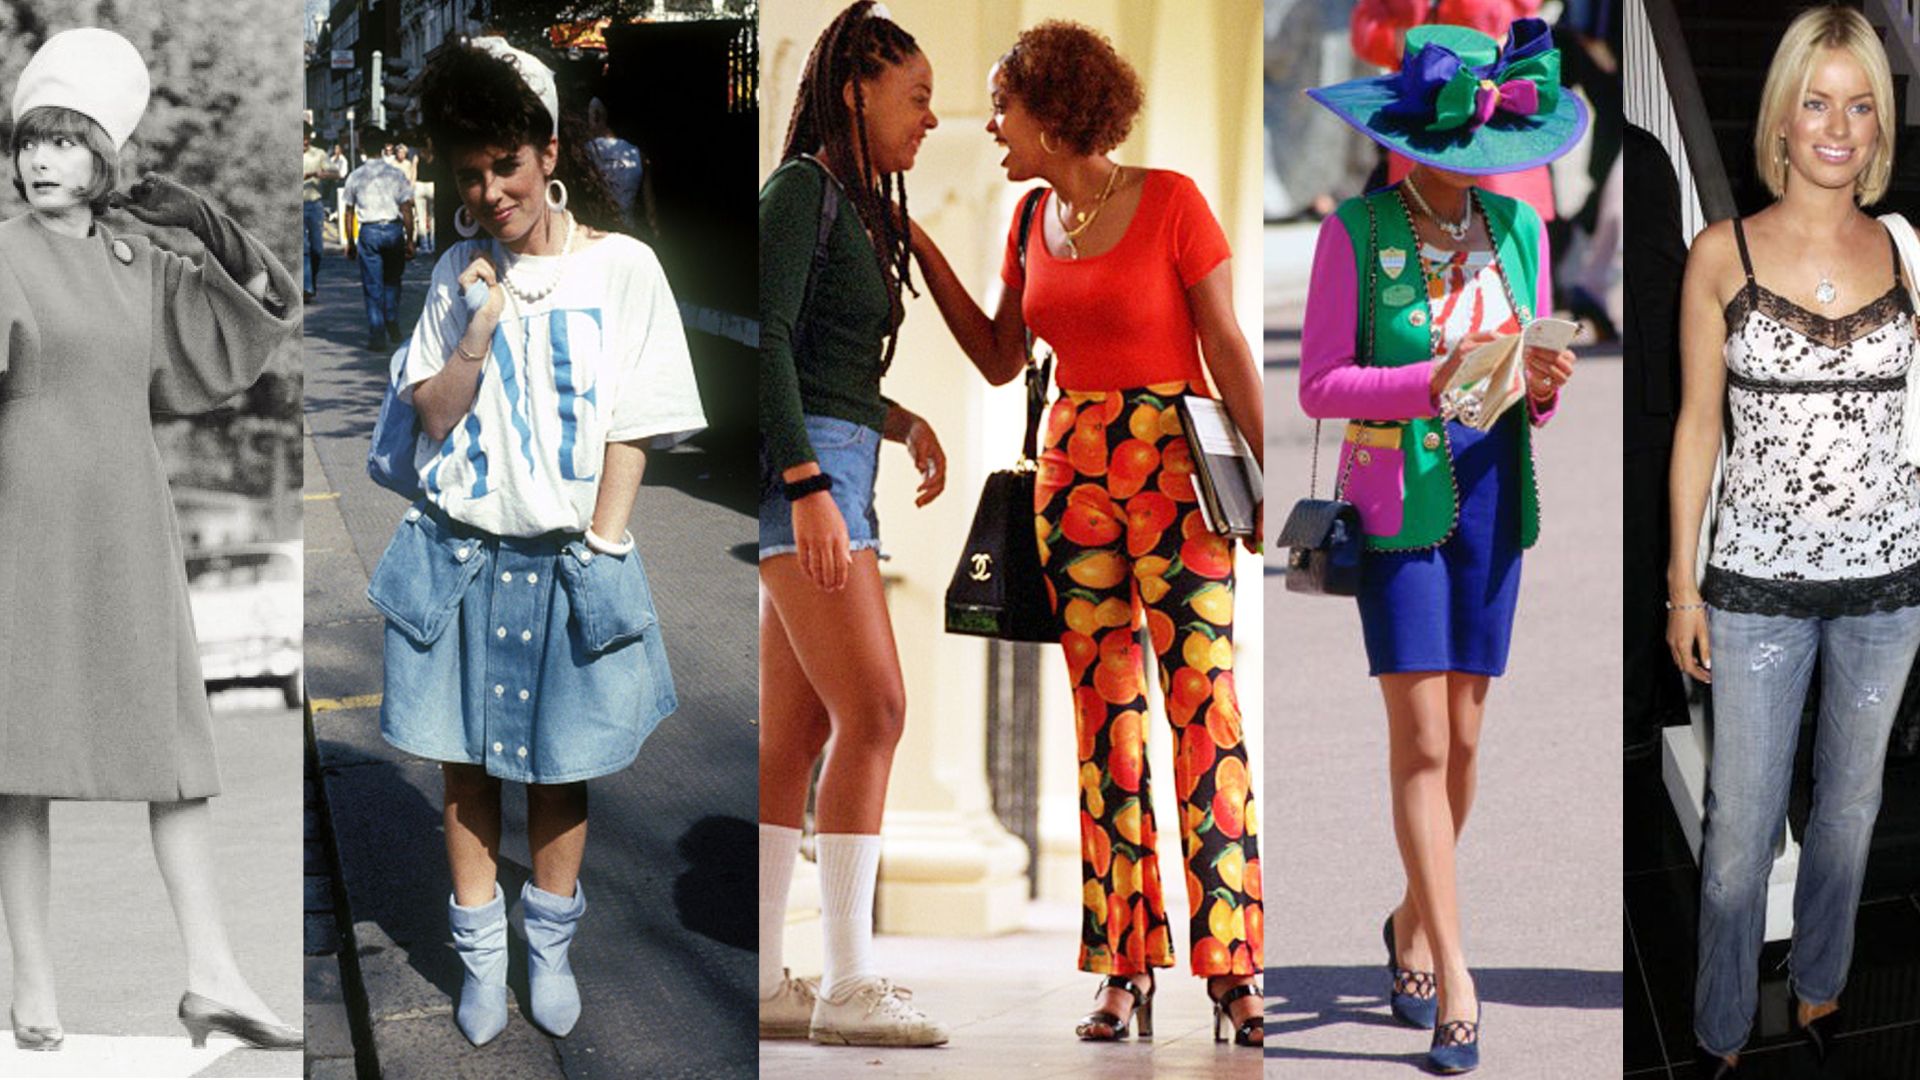 The History of Fashion in Pictures: 120 years of street style